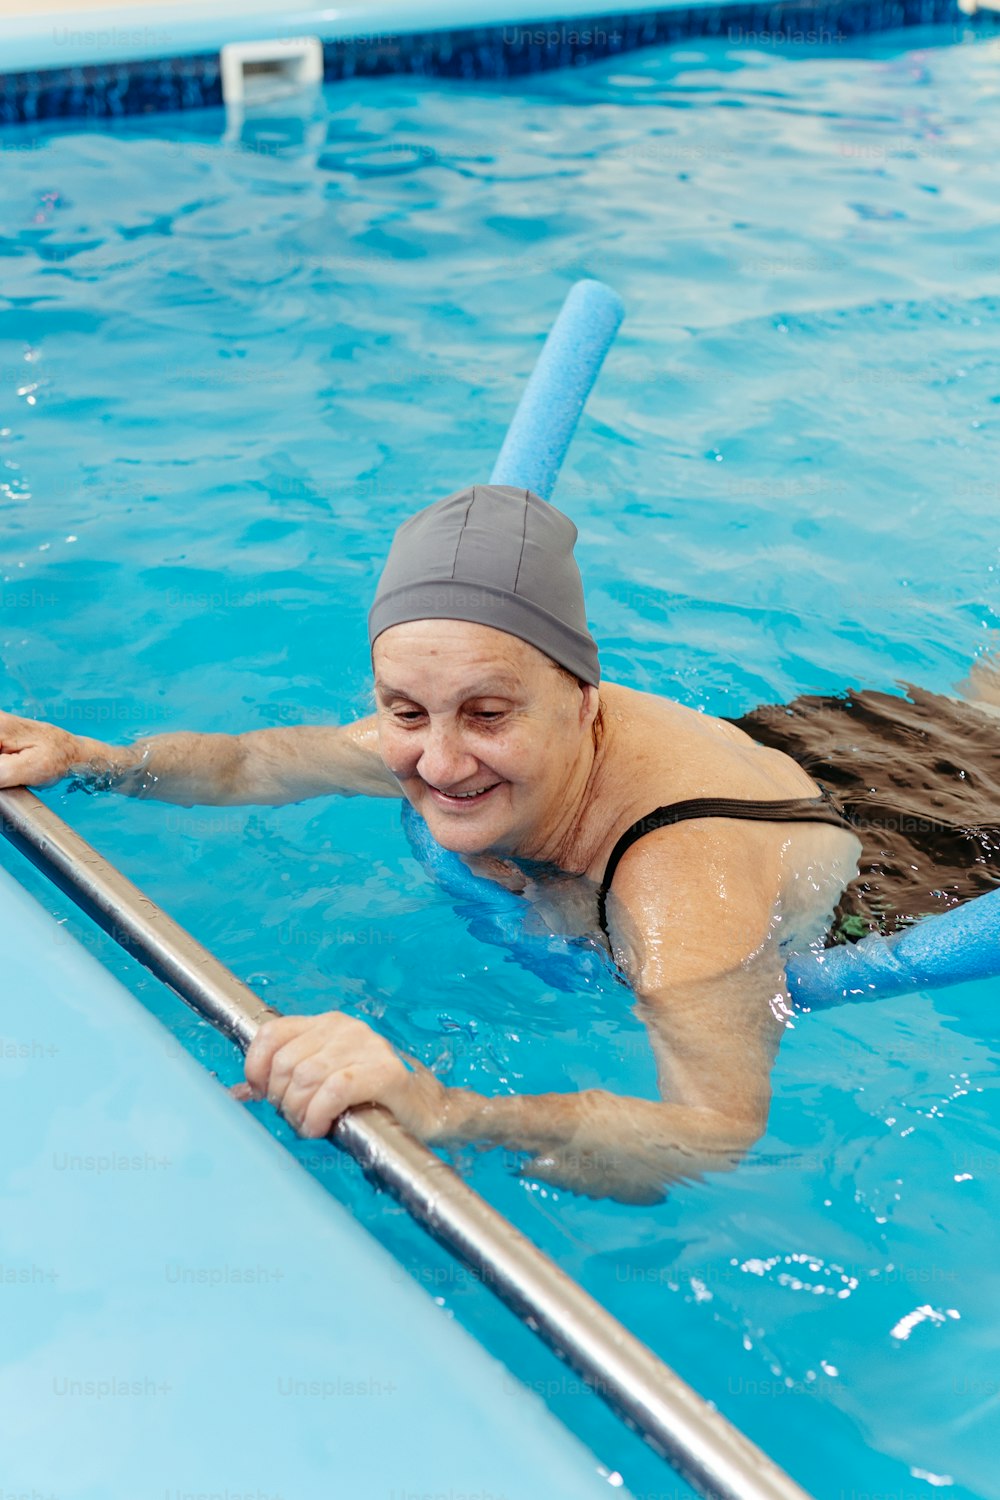 a woman swimming in a pool wearing a swimming cap